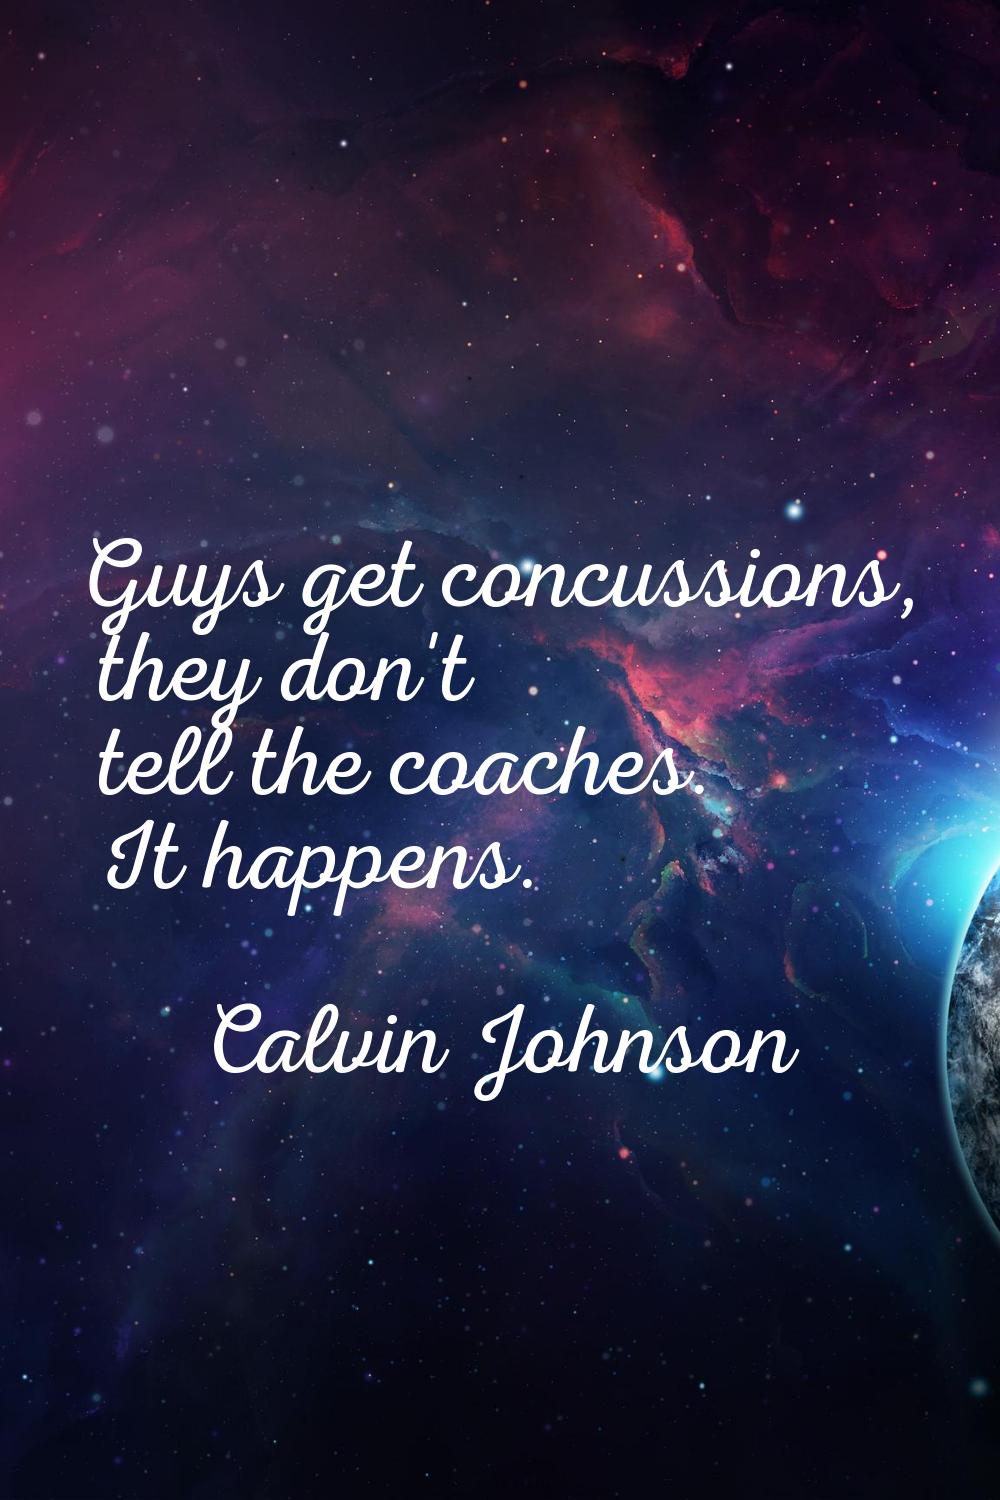 Guys get concussions, they don't tell the coaches. It happens.